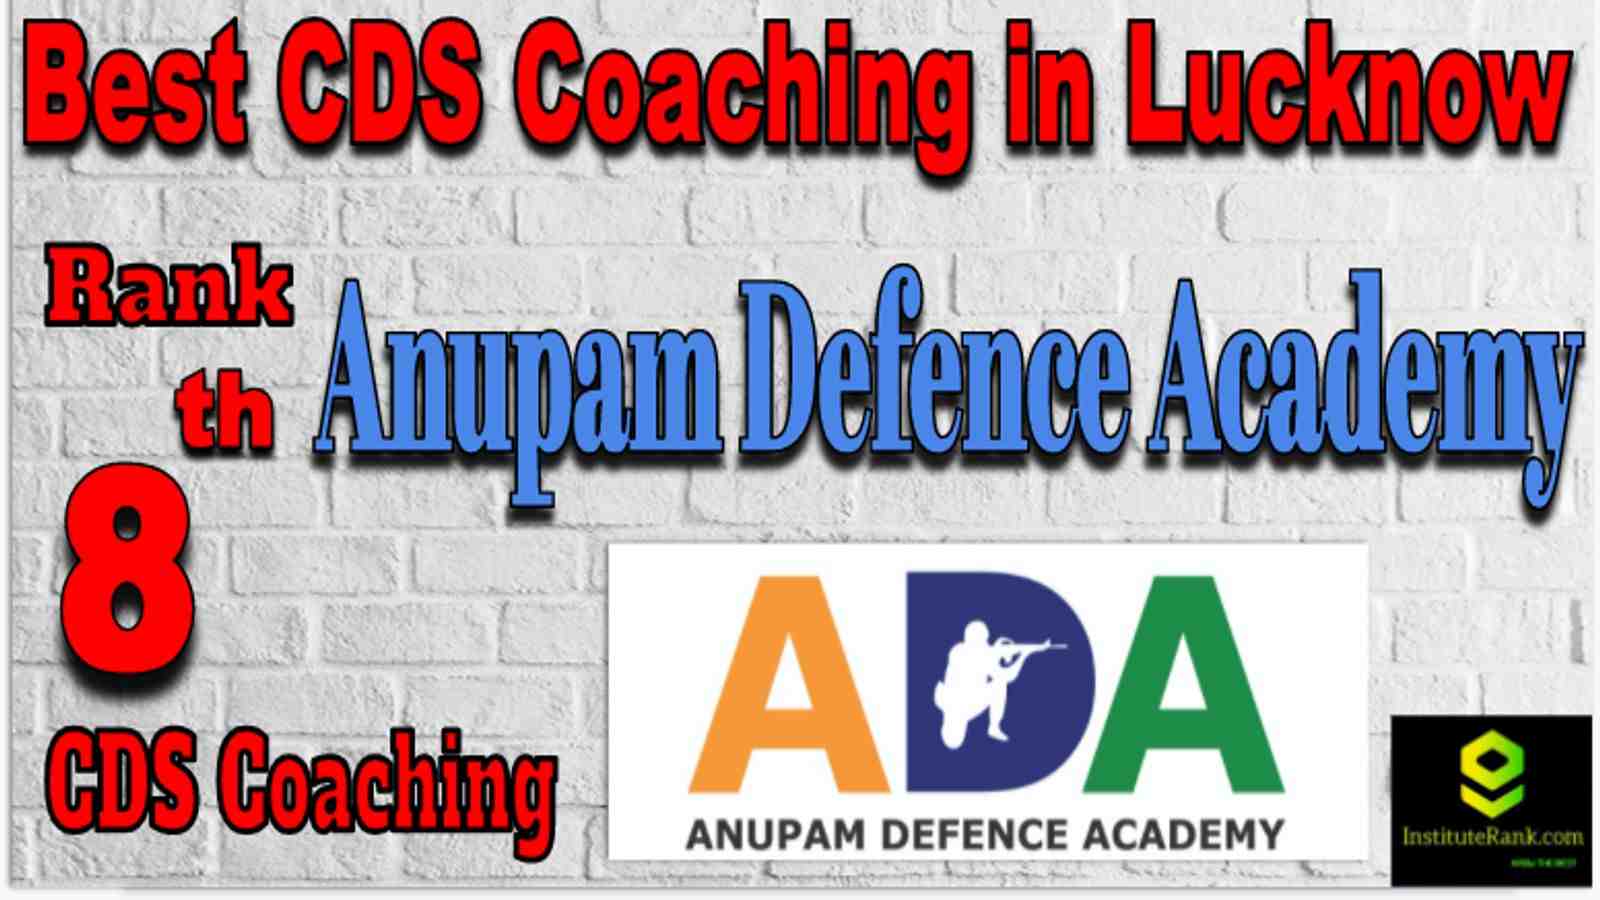 Rank 8 Top CDS Coaching in Lucknow